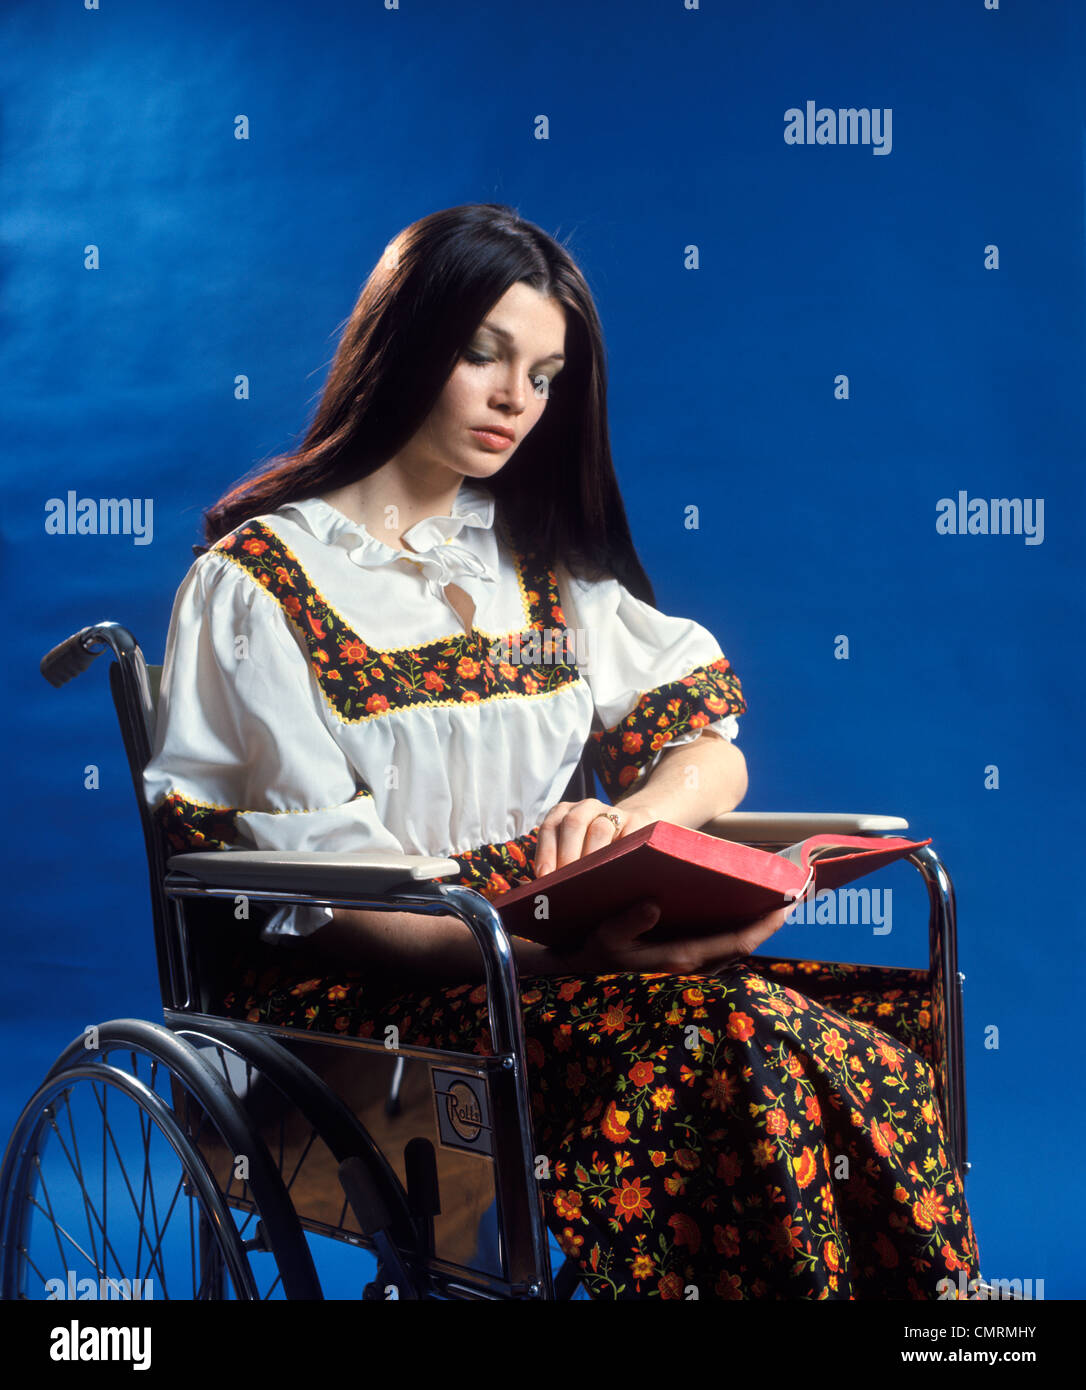 1970 1970s RETRO WOMAN LONG BROWN HAIR SITTING IN WHEELCHAIR READING BOOK PATIENT HEALTHCARE Stock Photo